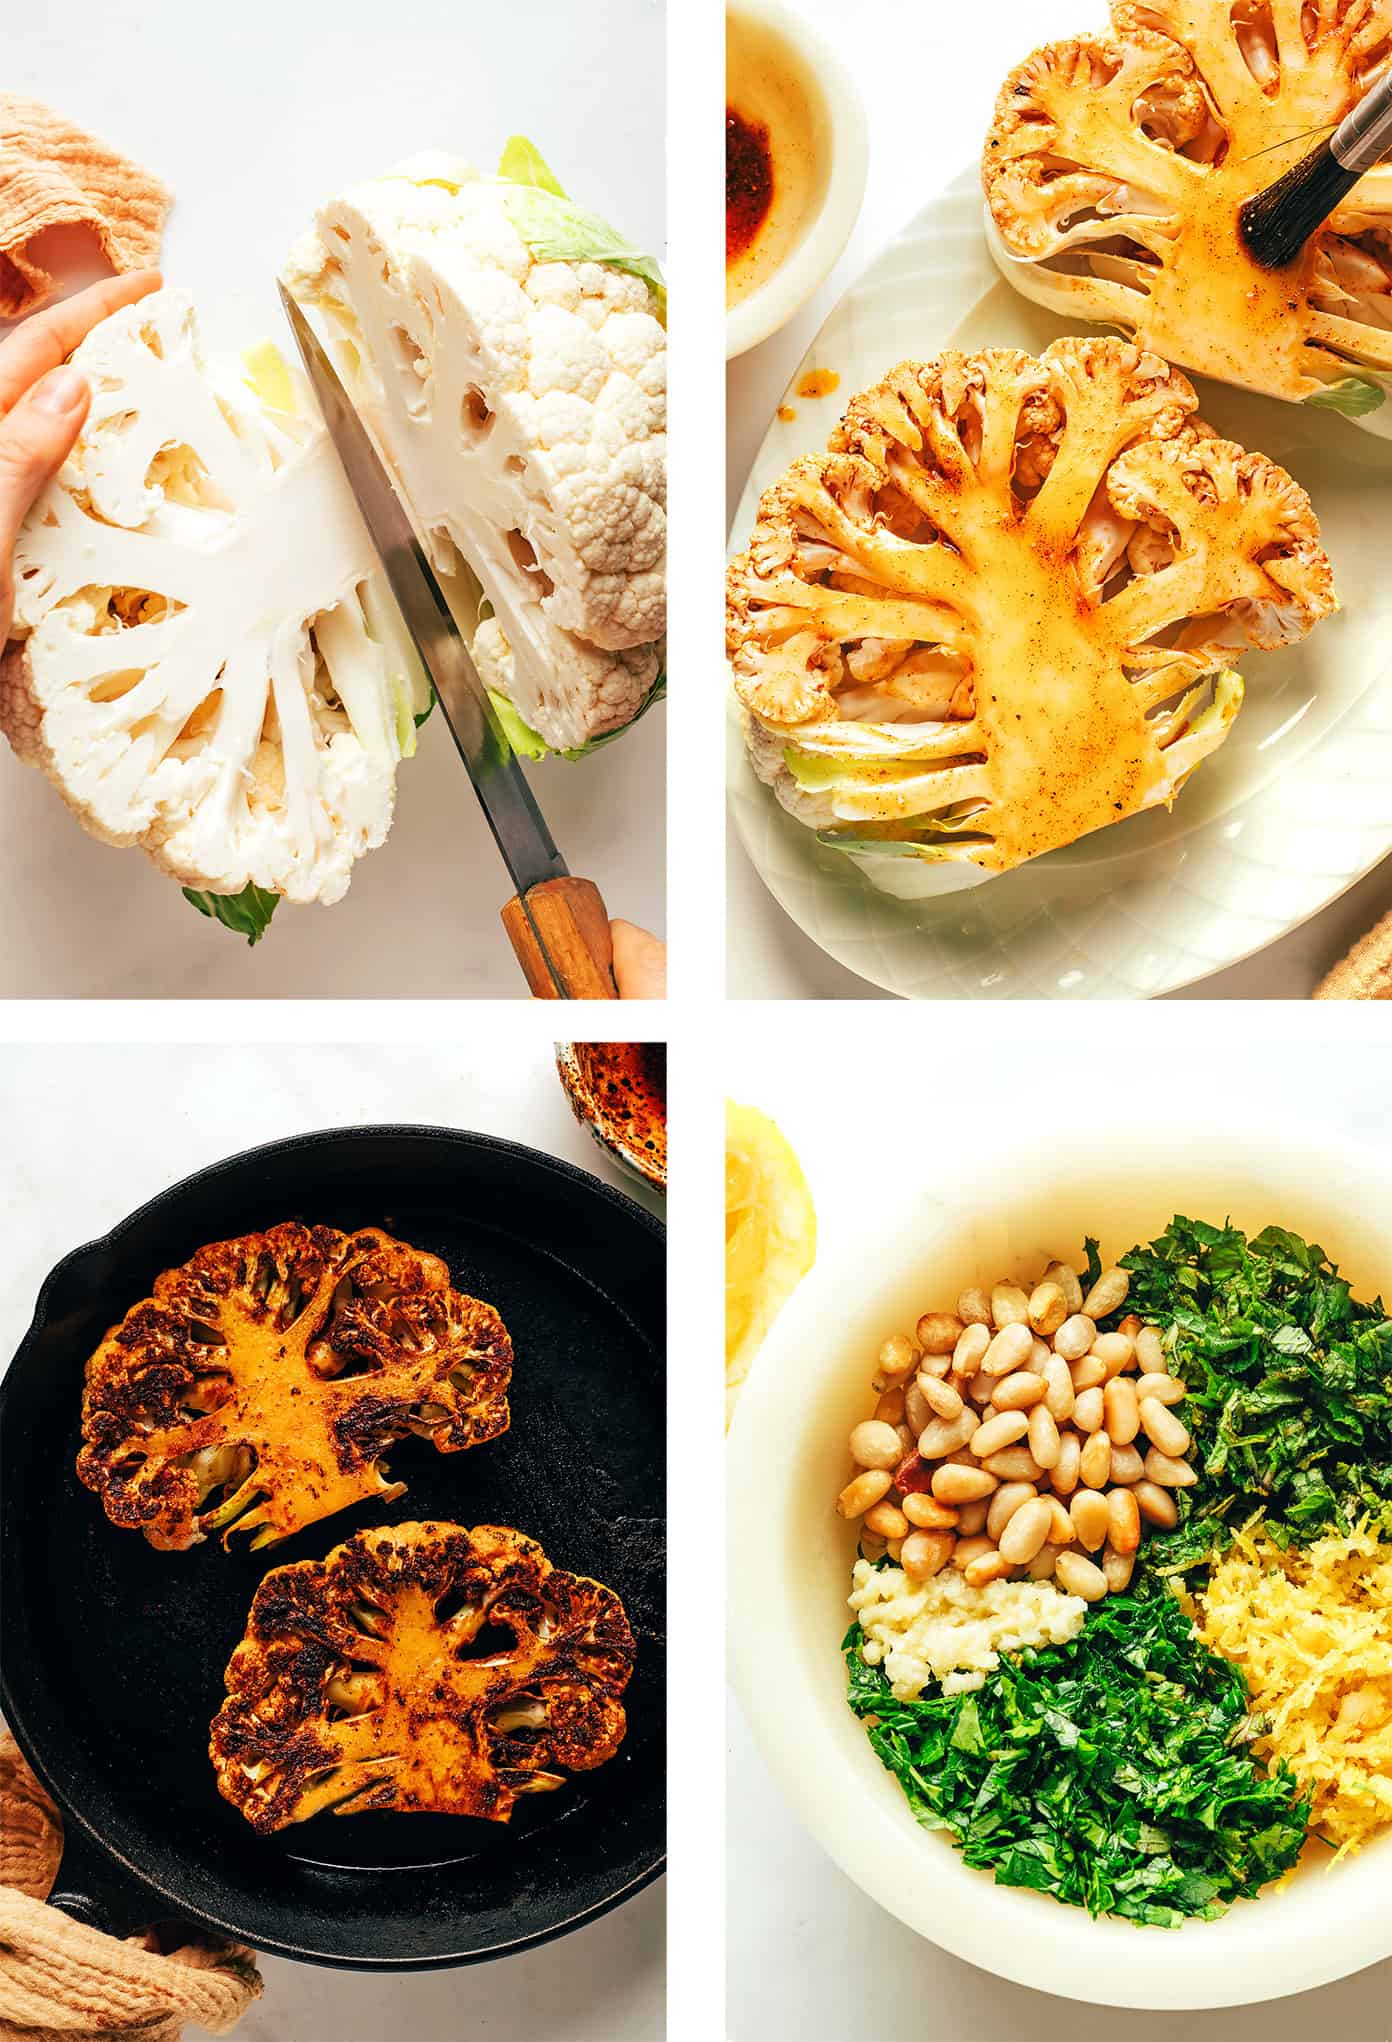 Step by step photos showing how to make cauliflower steaks and gremolata ingredients